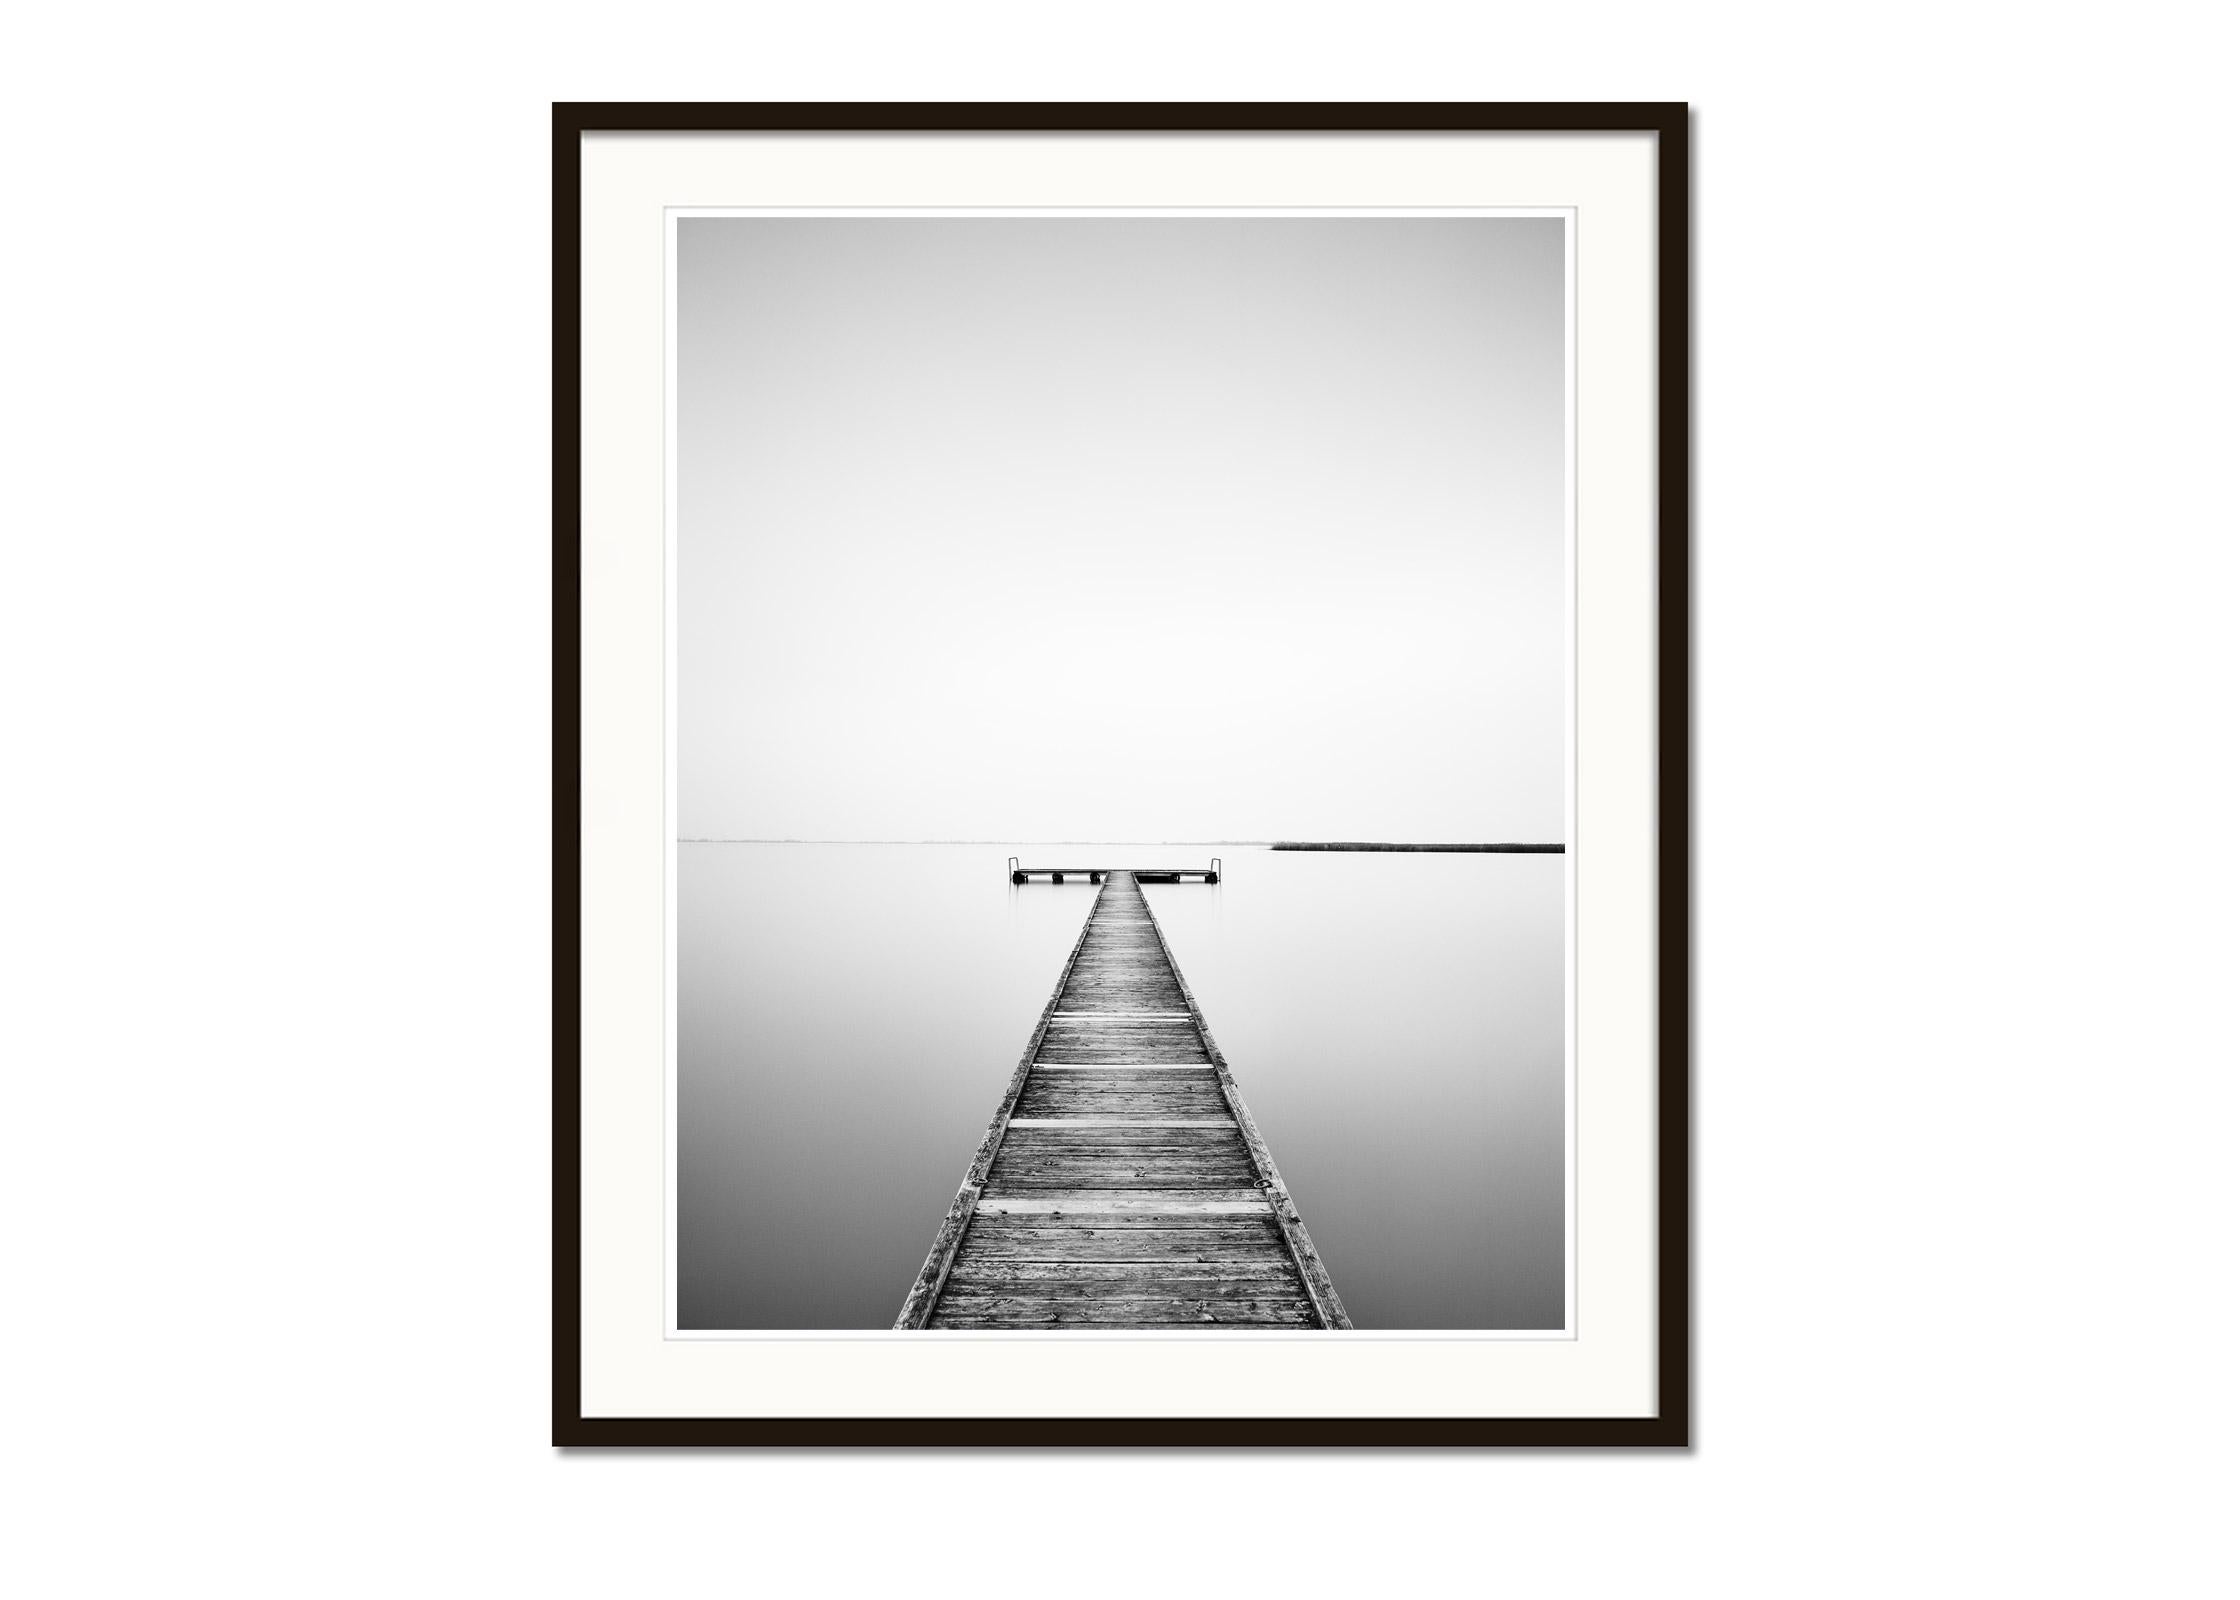 Wooden Pier on Lake, Austria, black and white fine art photography, landscape - Contemporary Photograph by Gerald Berghammer